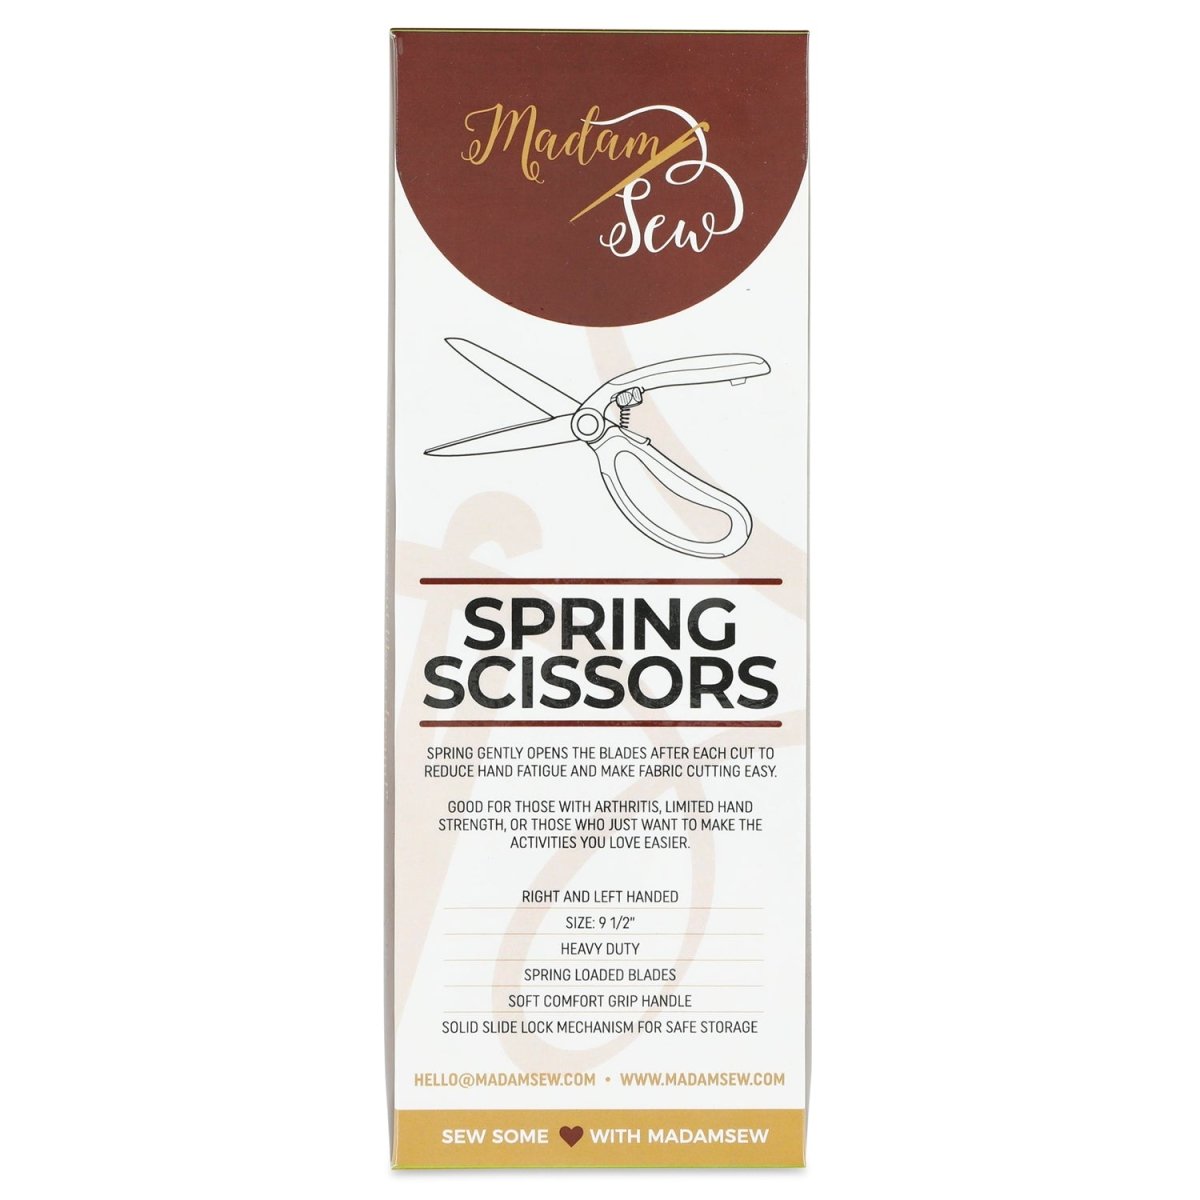 The packaging of the Madam Sew spring scissors